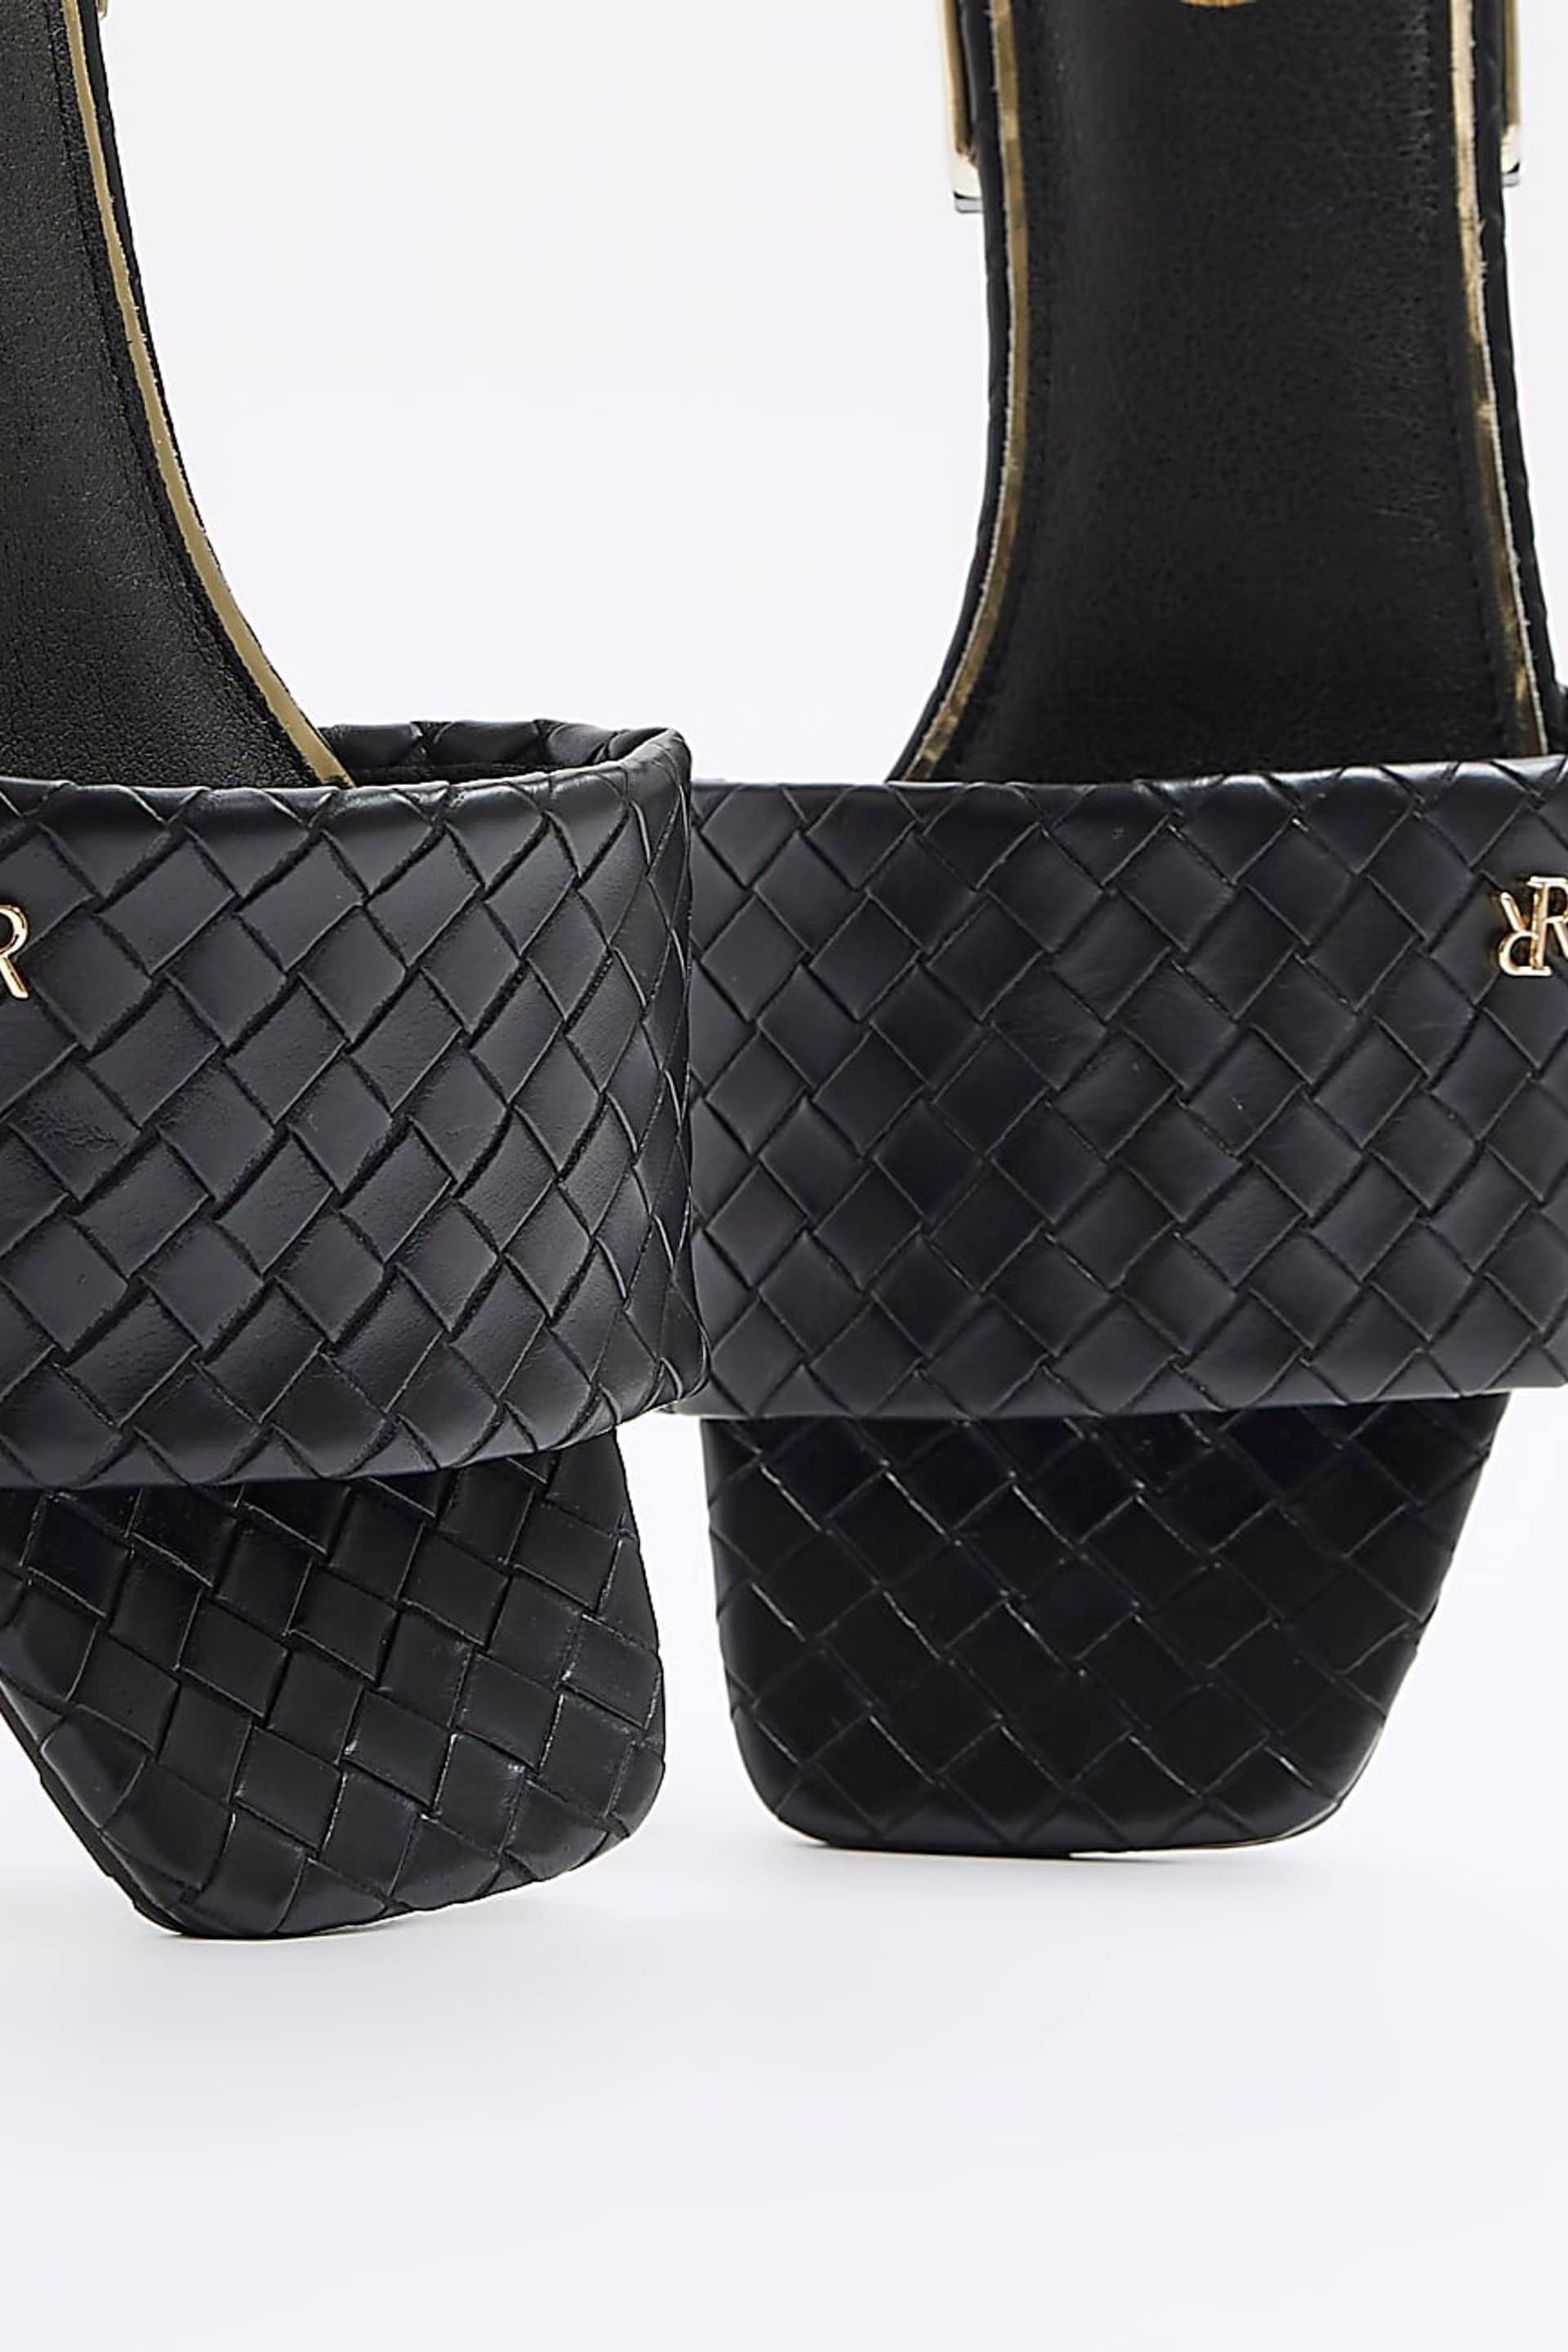 River Island Black Wide Fit Woven Mule Flat Sandals - Image 5 of 5